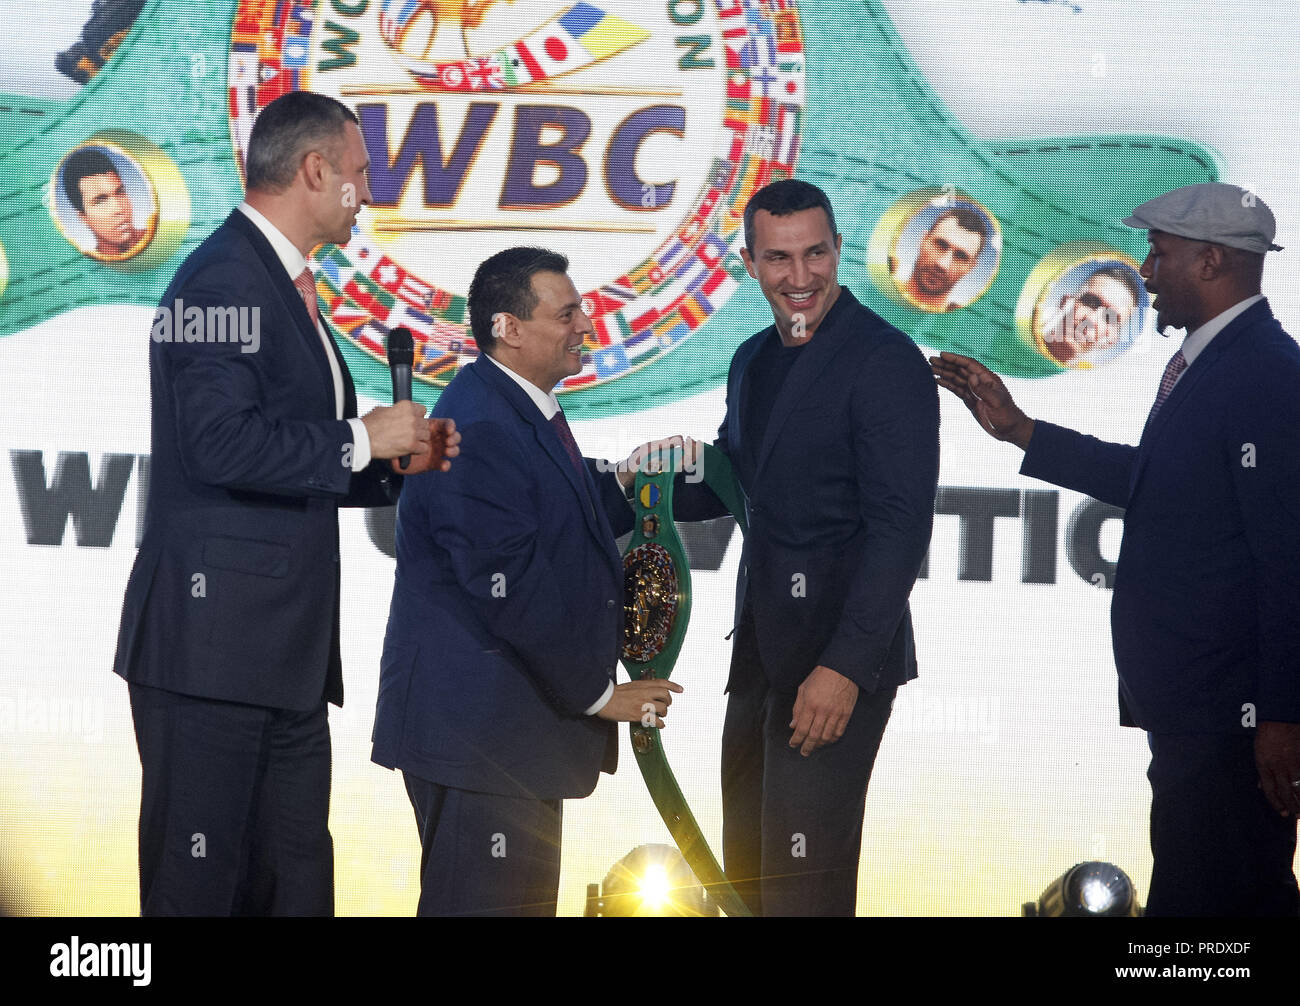 Kiev, Ukraine. 1st Oct, 2018. Mauricio Sulaiman, President of the World Boxing Council (WBC) (2-L) is seen giving the WBC honorary champion belt to Vladimir Klitschko, Ukrainian boxing Champion (2-R), while Vitali Klitschko, former heavyweight boxing champion and current Mayor of Kiev (L) and Lennox Lewis, former Boxing Champion (R) look on, during ceremony of opening of the 56th WBC Convention in Kiev, Ukraine. The 56th WBC Convention in which take part boxing legends Evander Holyfield, Lennox Lewis, Eric Morales and about 700 participants from 160 countries runs in Kiev from September 30 Stock Photo